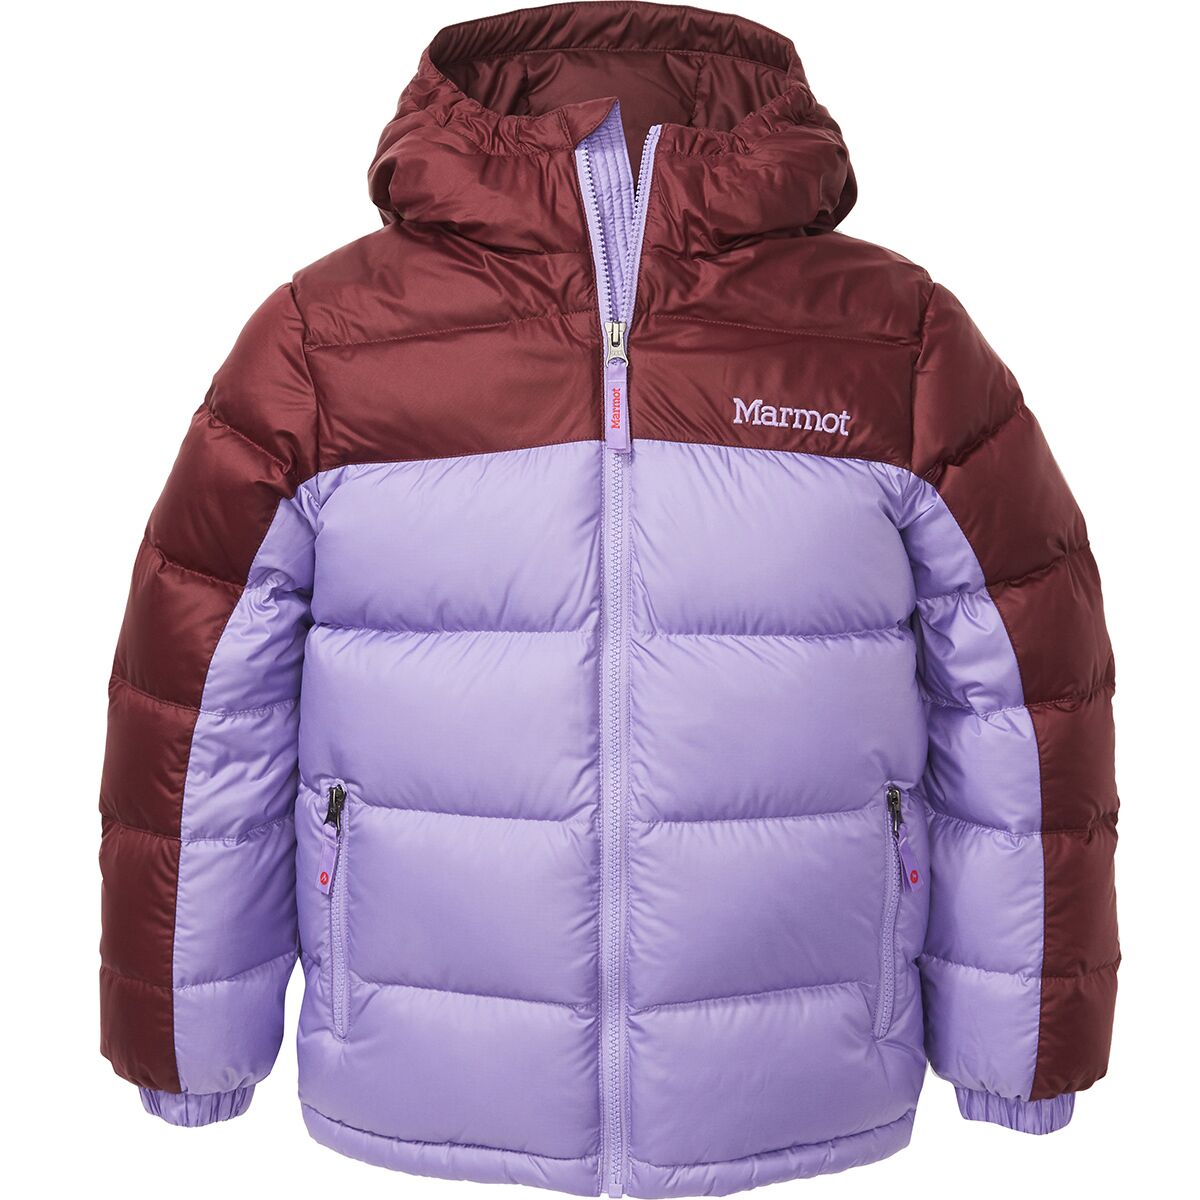 Marmot Guides Down Hooded Jacket - Boys'